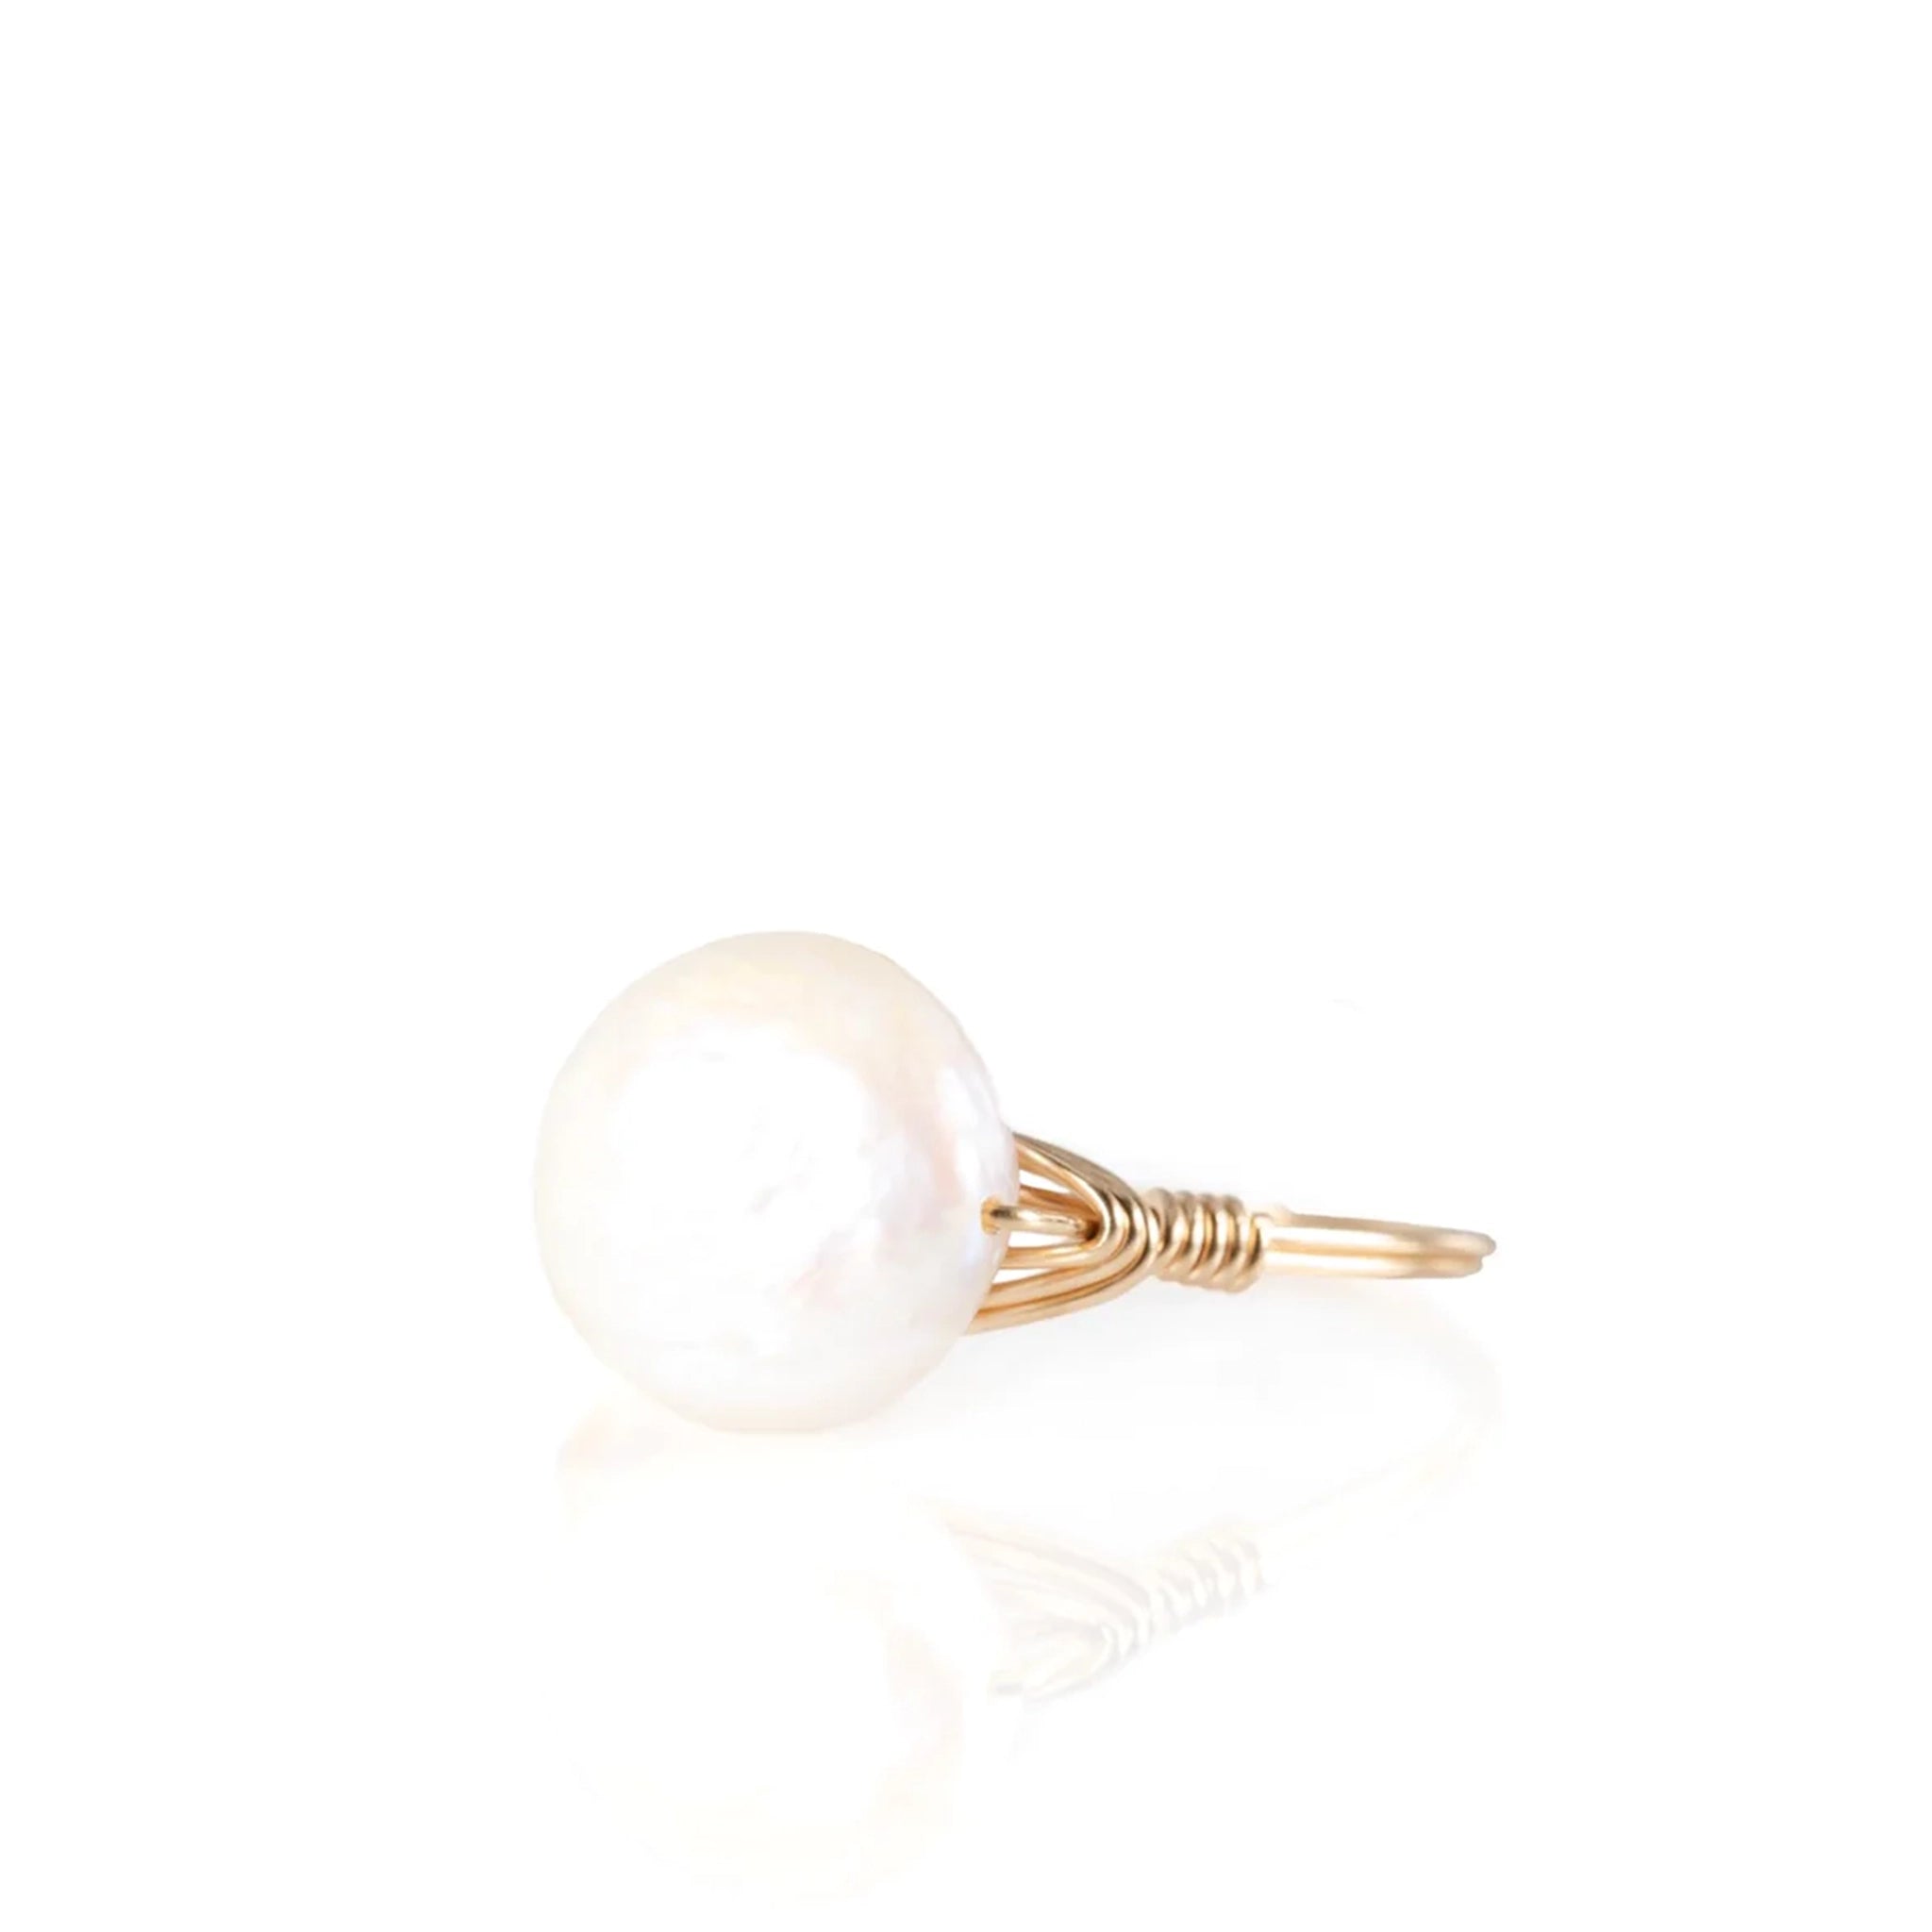 A gold ring, with a circle freshwater pearl in the center.  